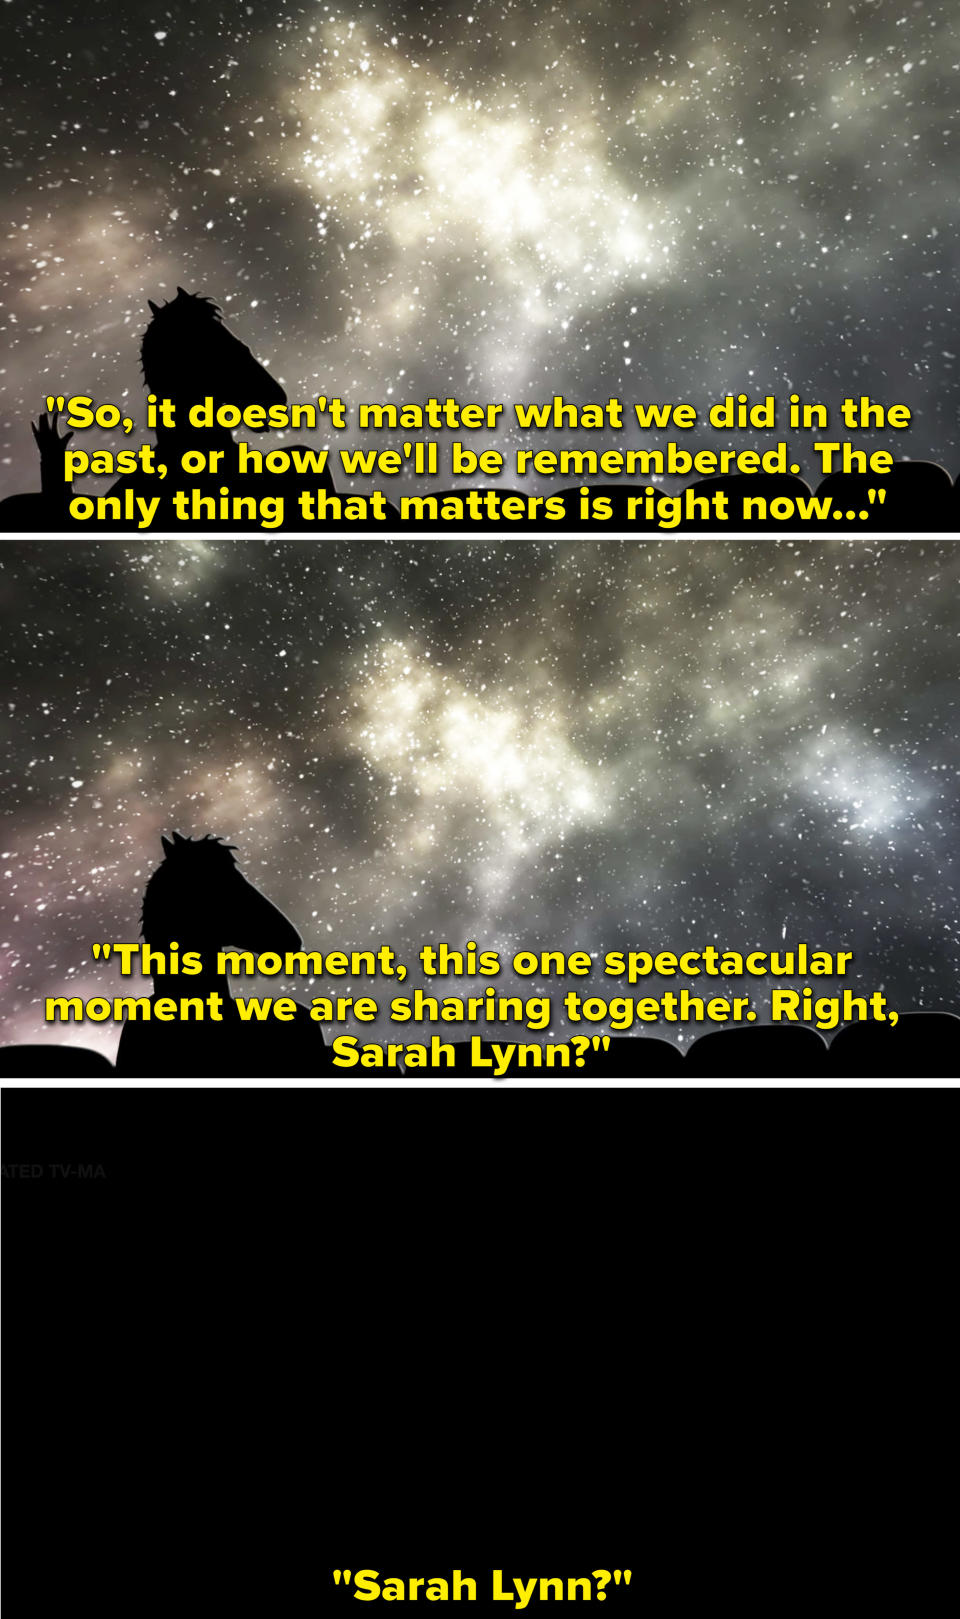 BoJack talking to Sarah Lynn and saying, "The only thing that matters is right now. This one spectacular moment we are sharing together"